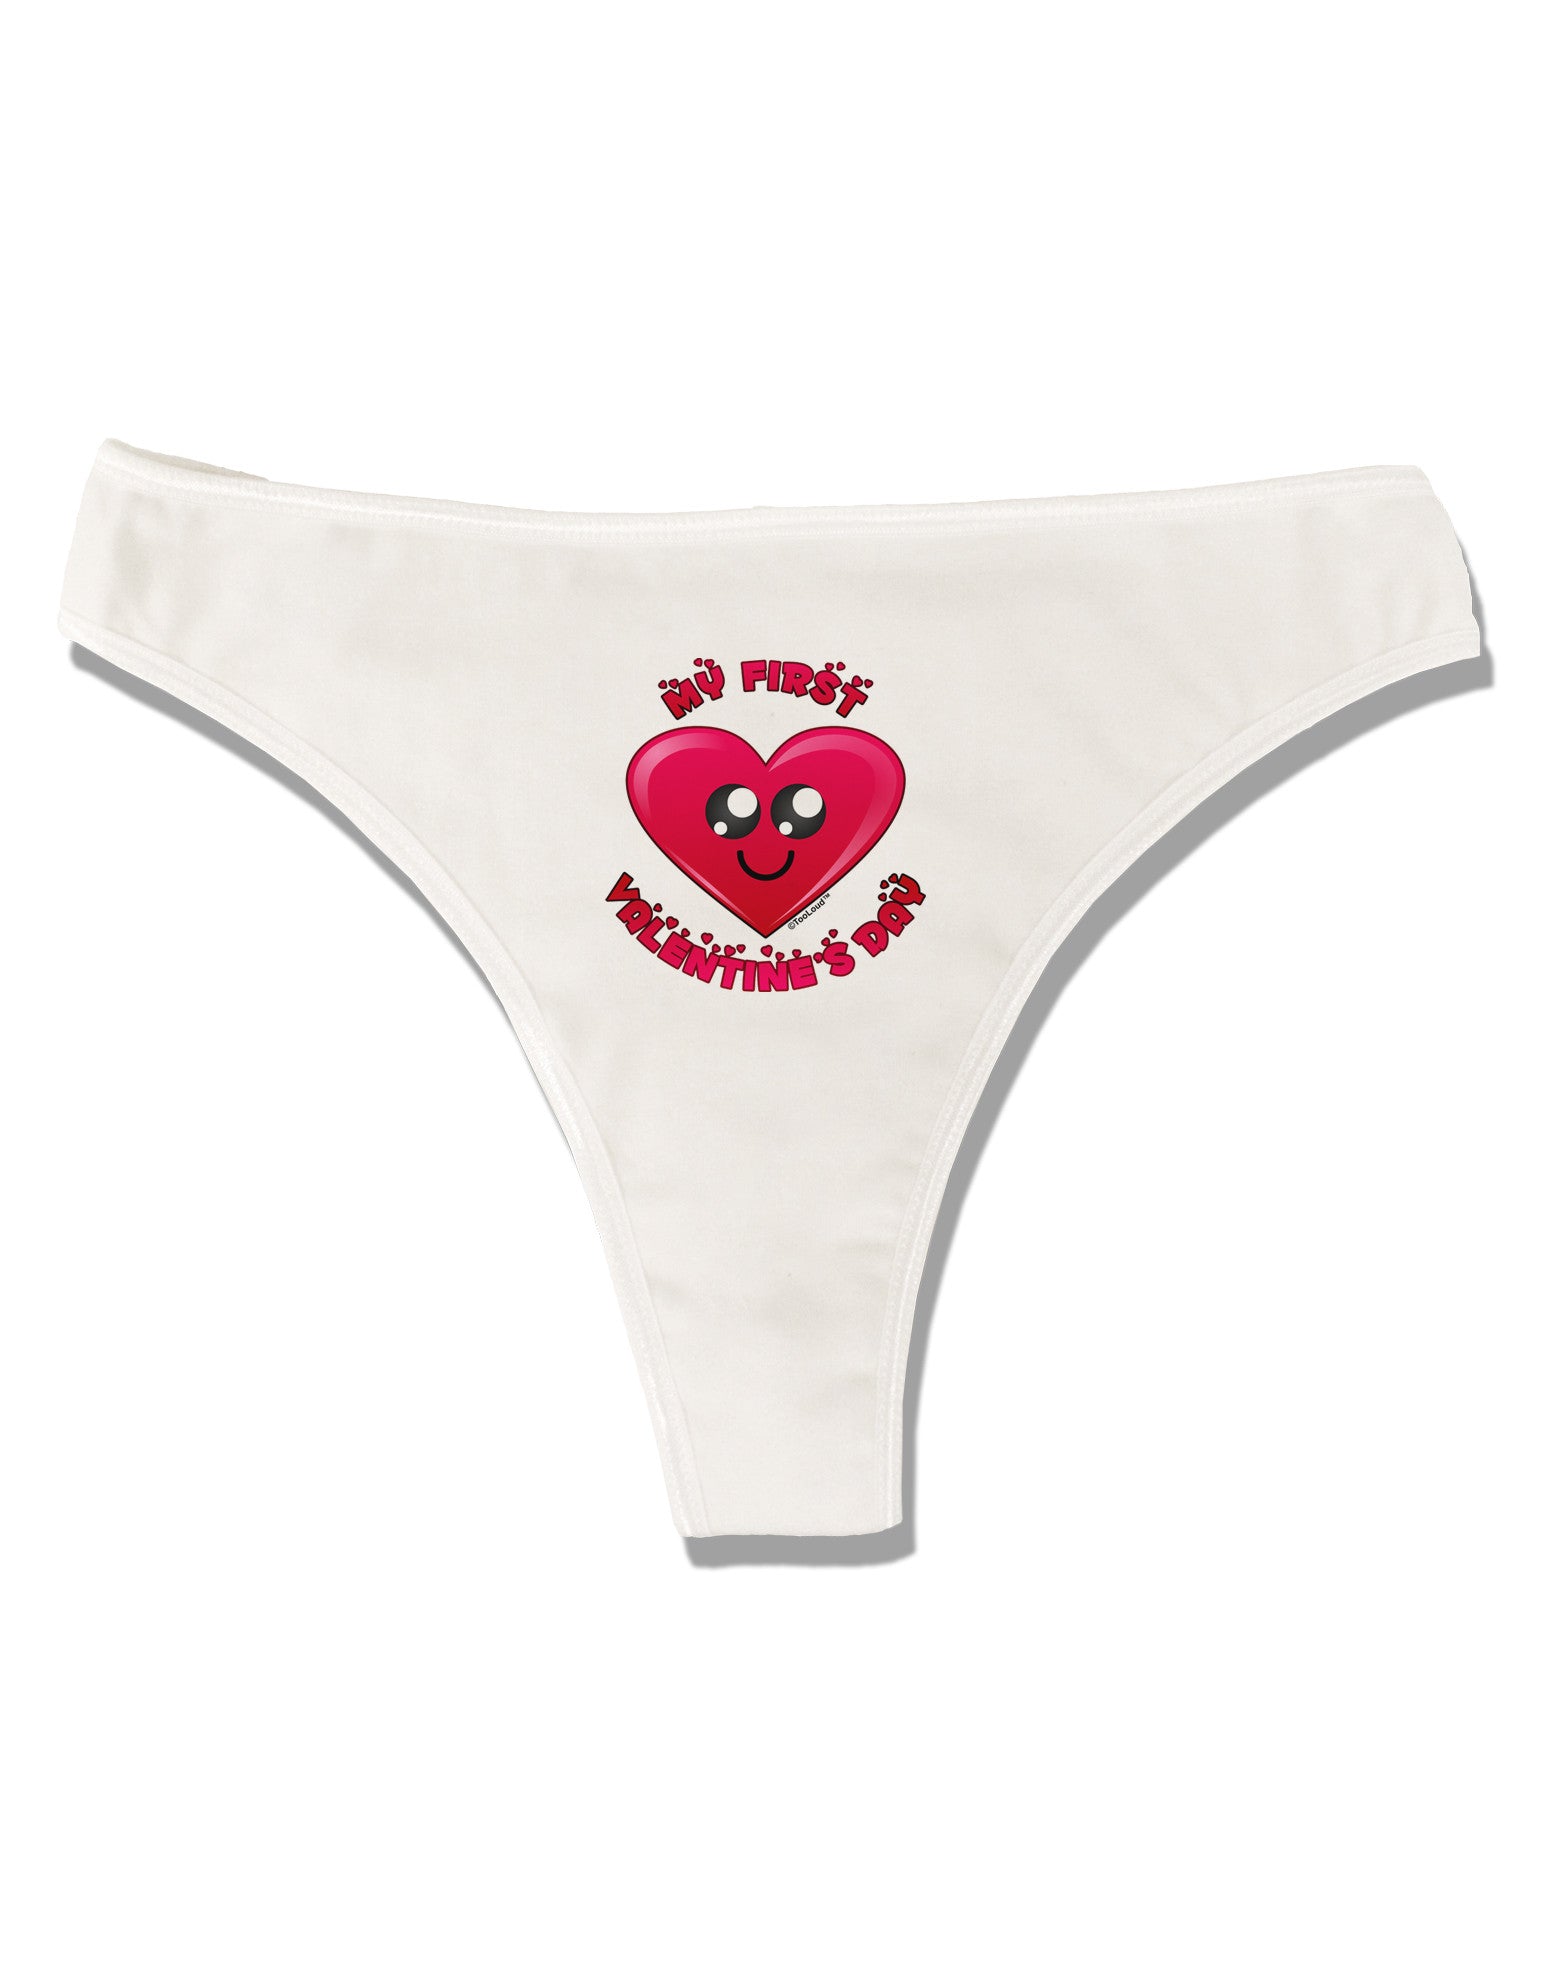 Are you or someone you know - My Undies-Lingerie and Gifts